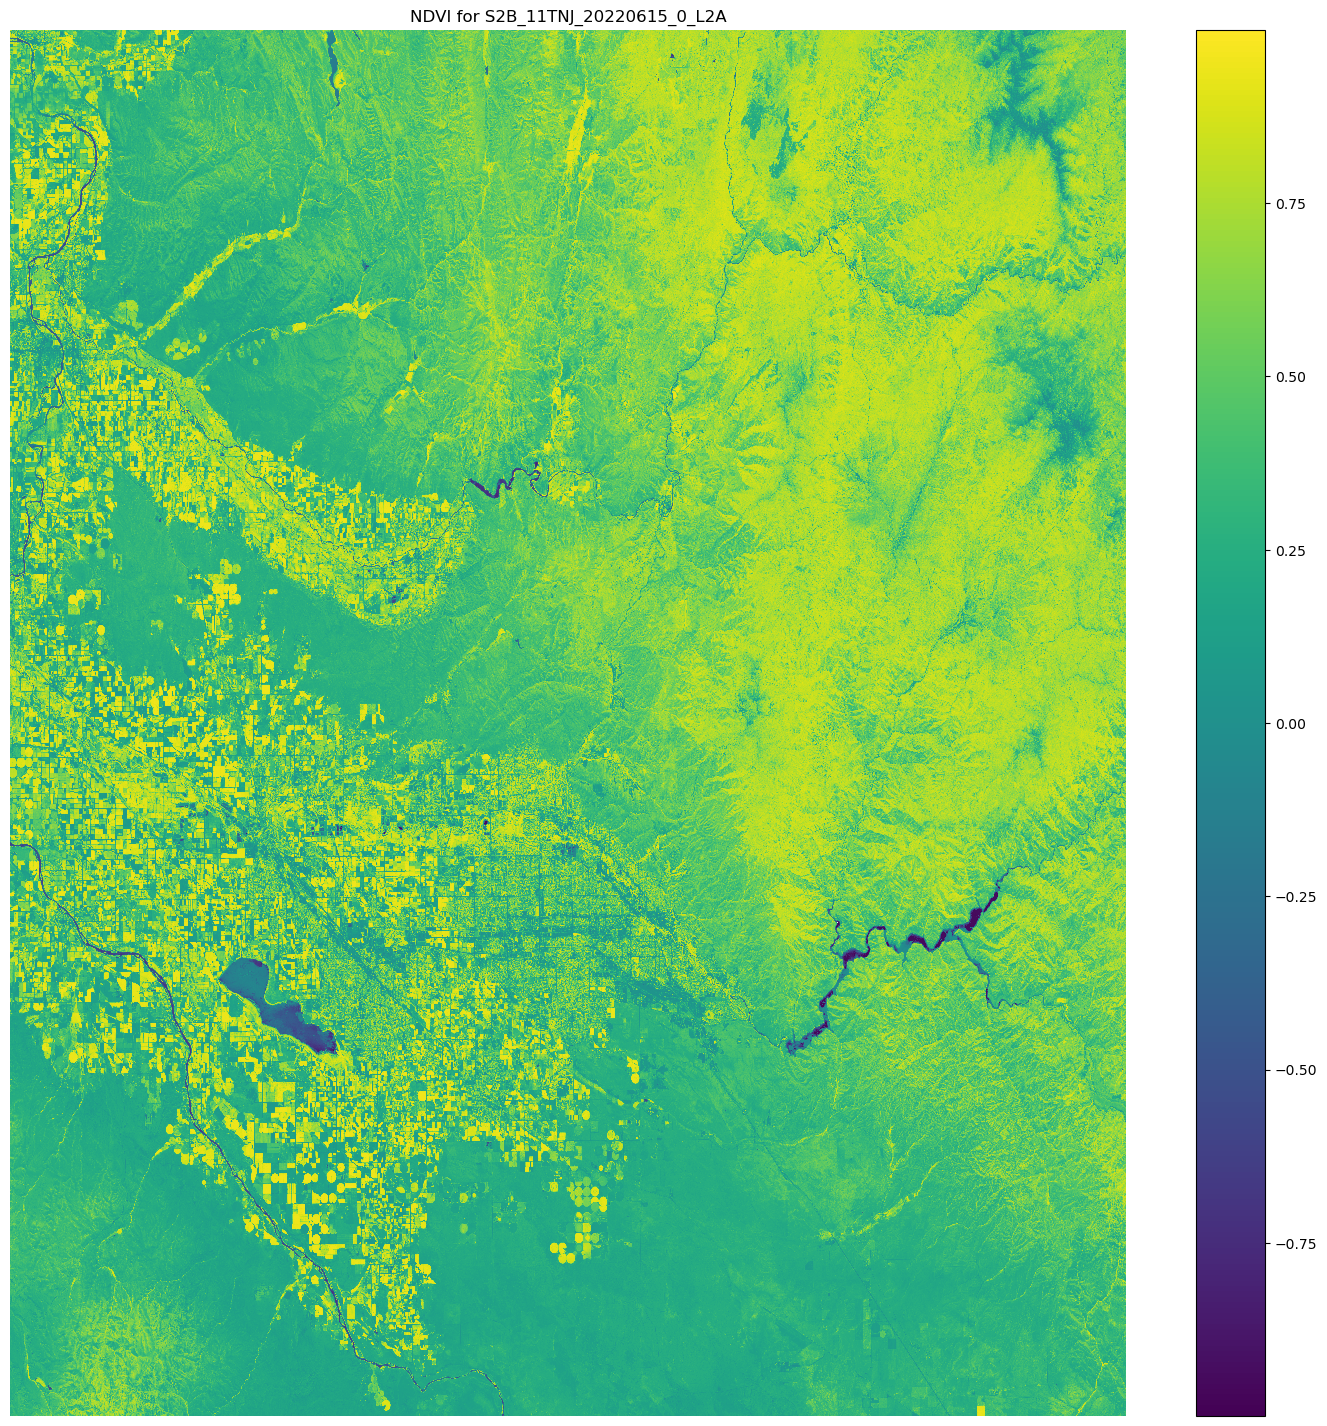 A satellite image of northern Iowa with the NDVI overlaid on top